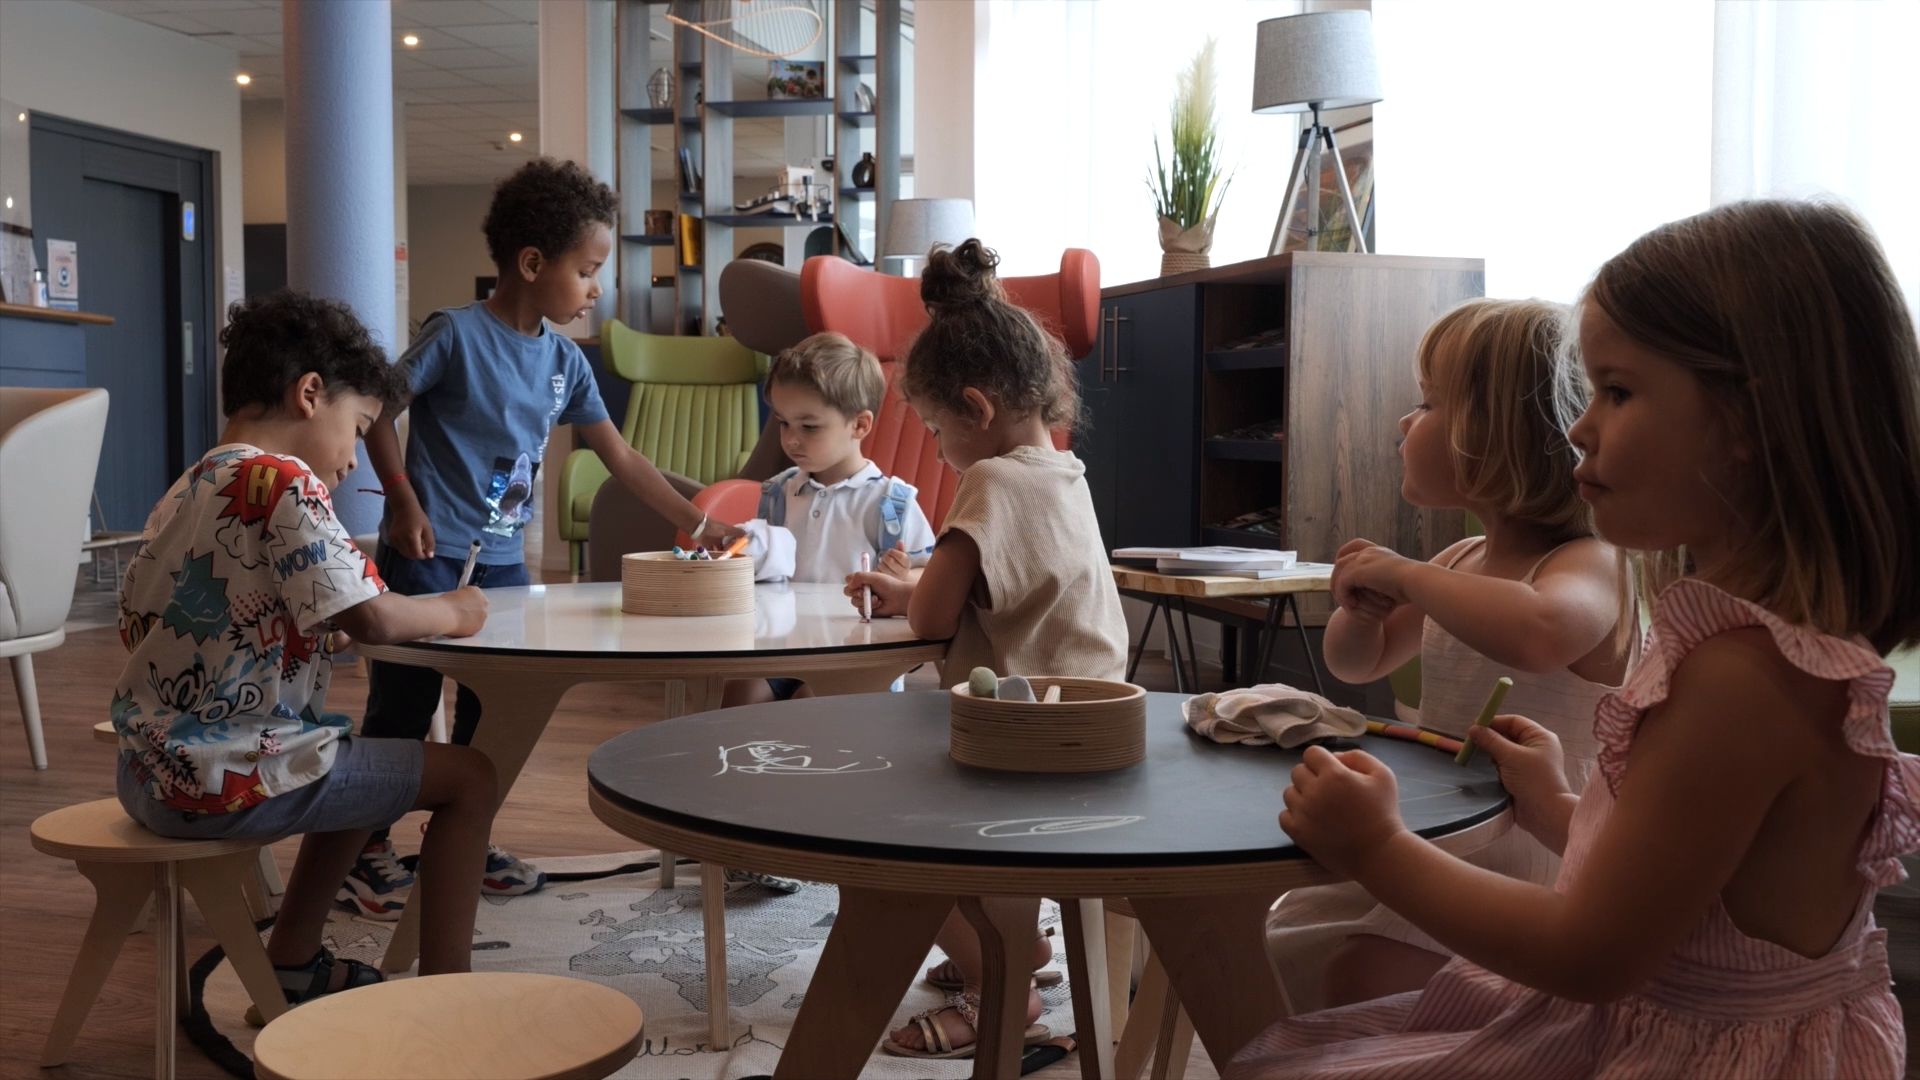 Children playing on the Drawin'table at Maison & Objet show